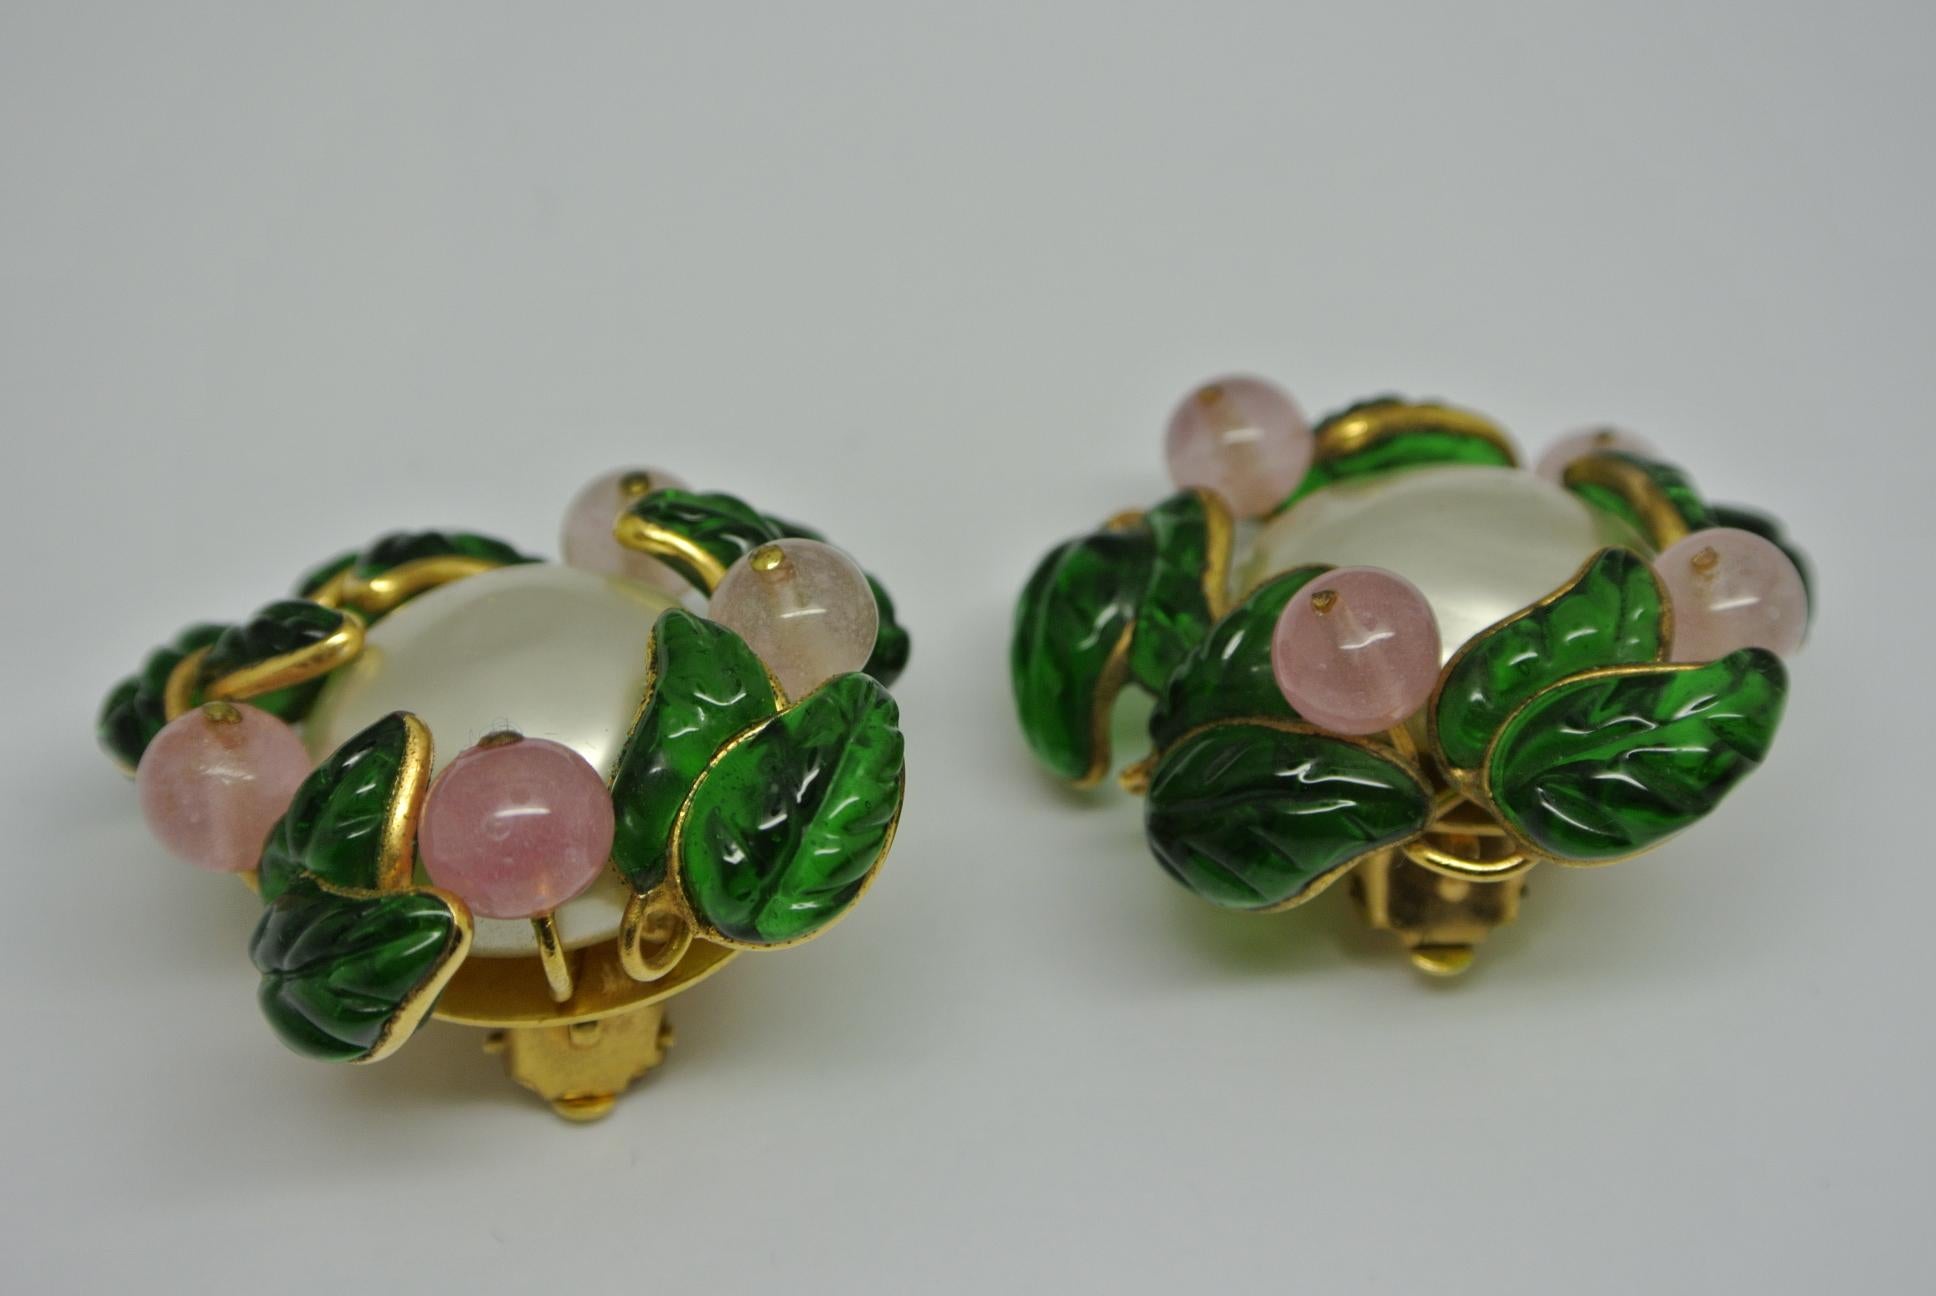 Leaf Berry design with faux pearl, gripoix made glasses earrings, dated 1970s. Large couture pair, statement piece. Signed. Good condition, few tiny scratch marks on pearls.